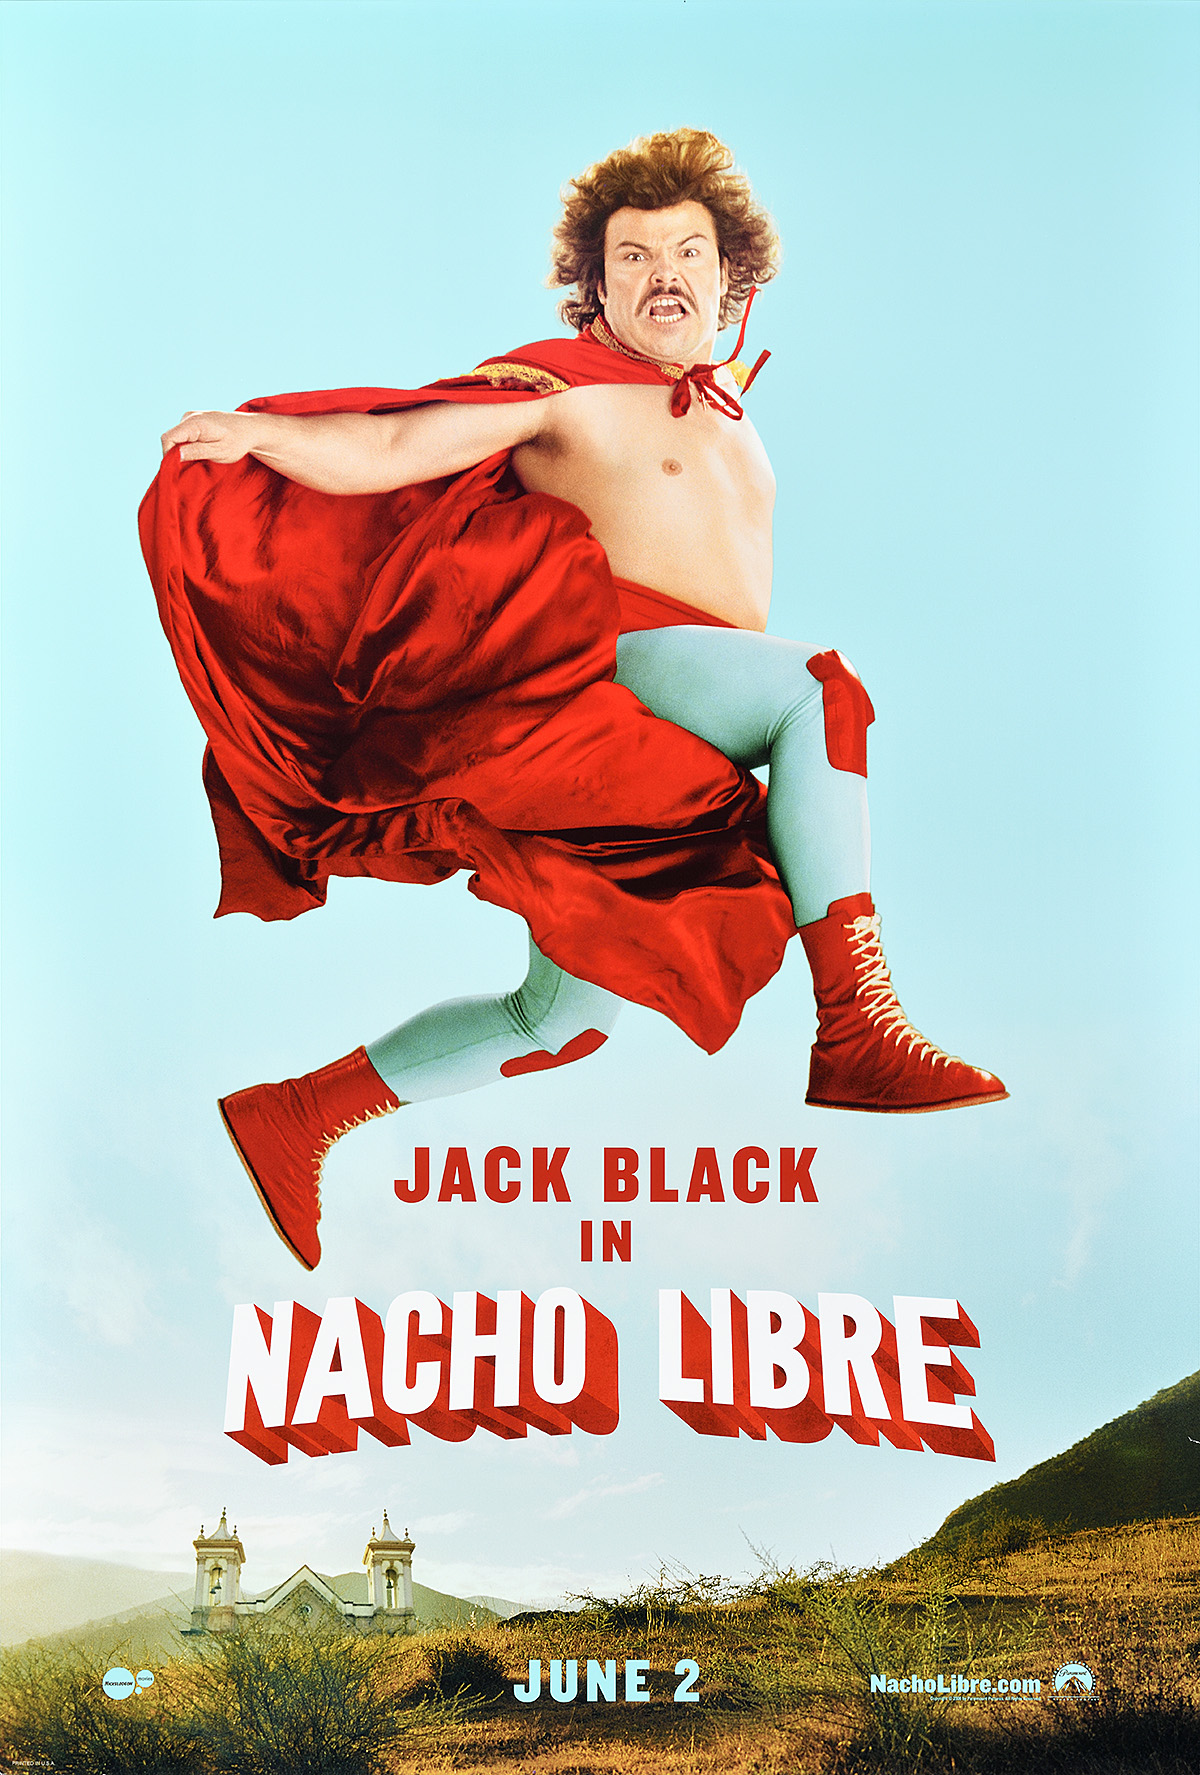 A poster of a shirtless man jumping in the air wearing a cape that's tangled in his legs.